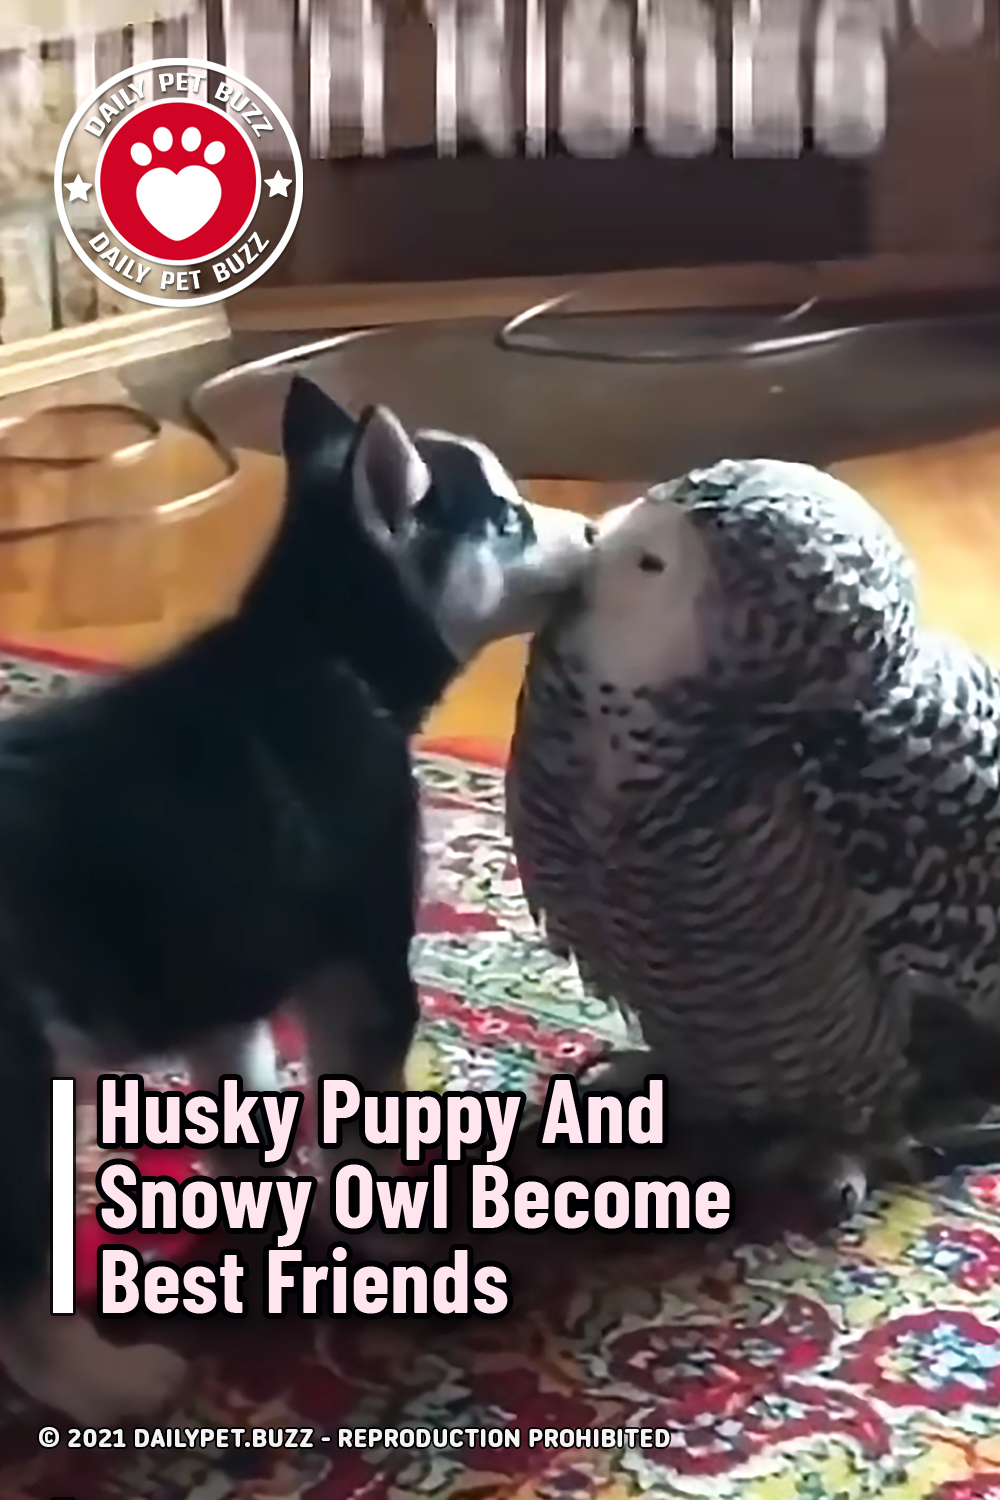 Husky Puppy And Snowy Owl Become Best Friends